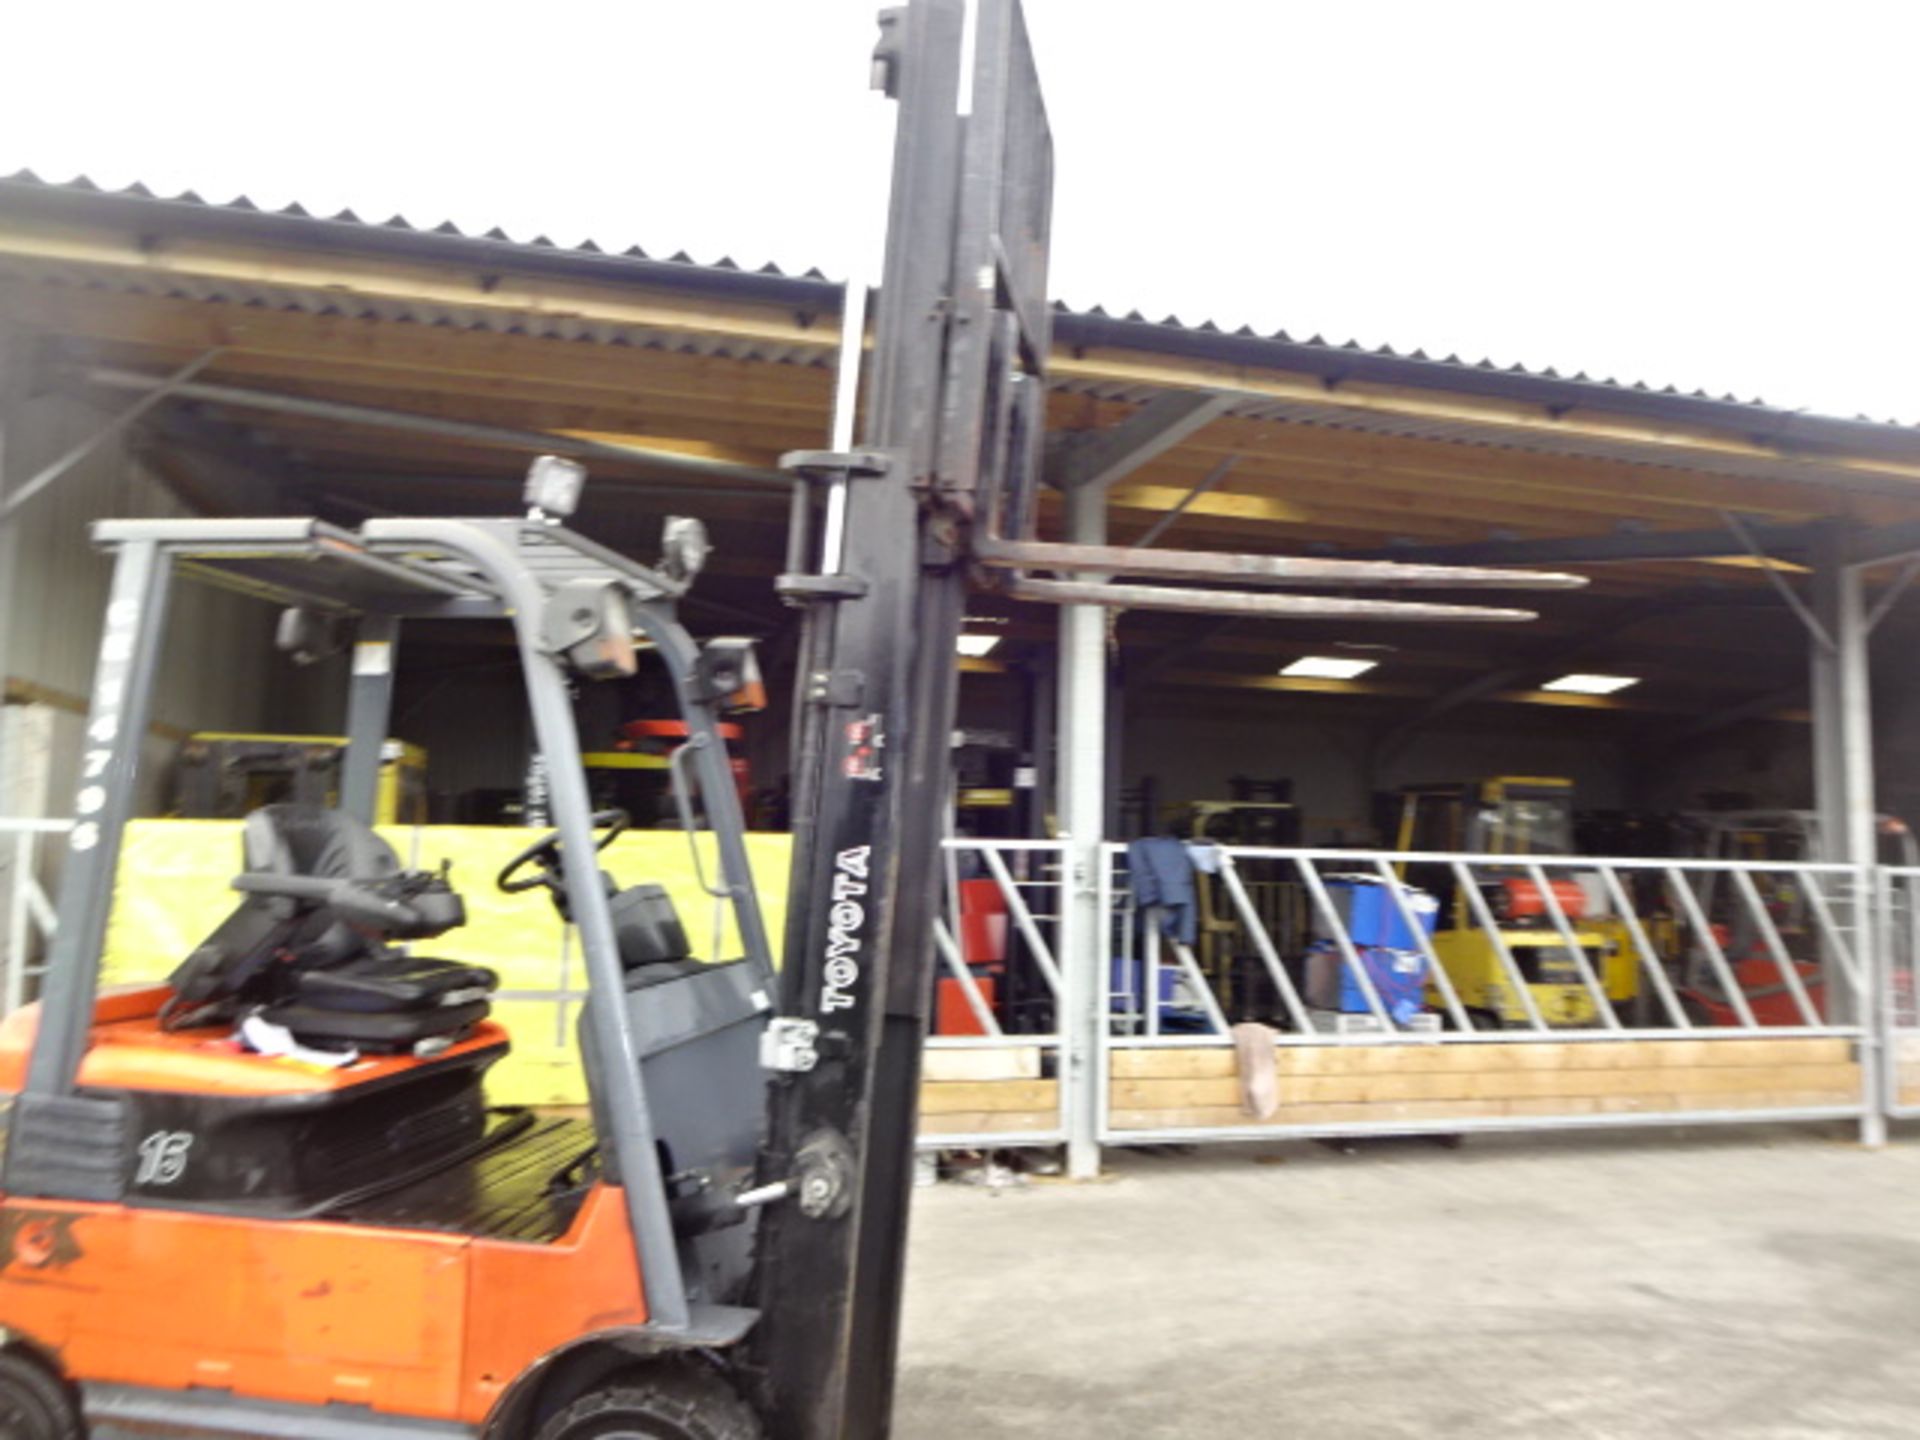 2010 TOYOTA 7FBMF16 1.6t battery driven forklift truck S/n: E14720 with duplex mast & side-shift ( - Image 4 of 7